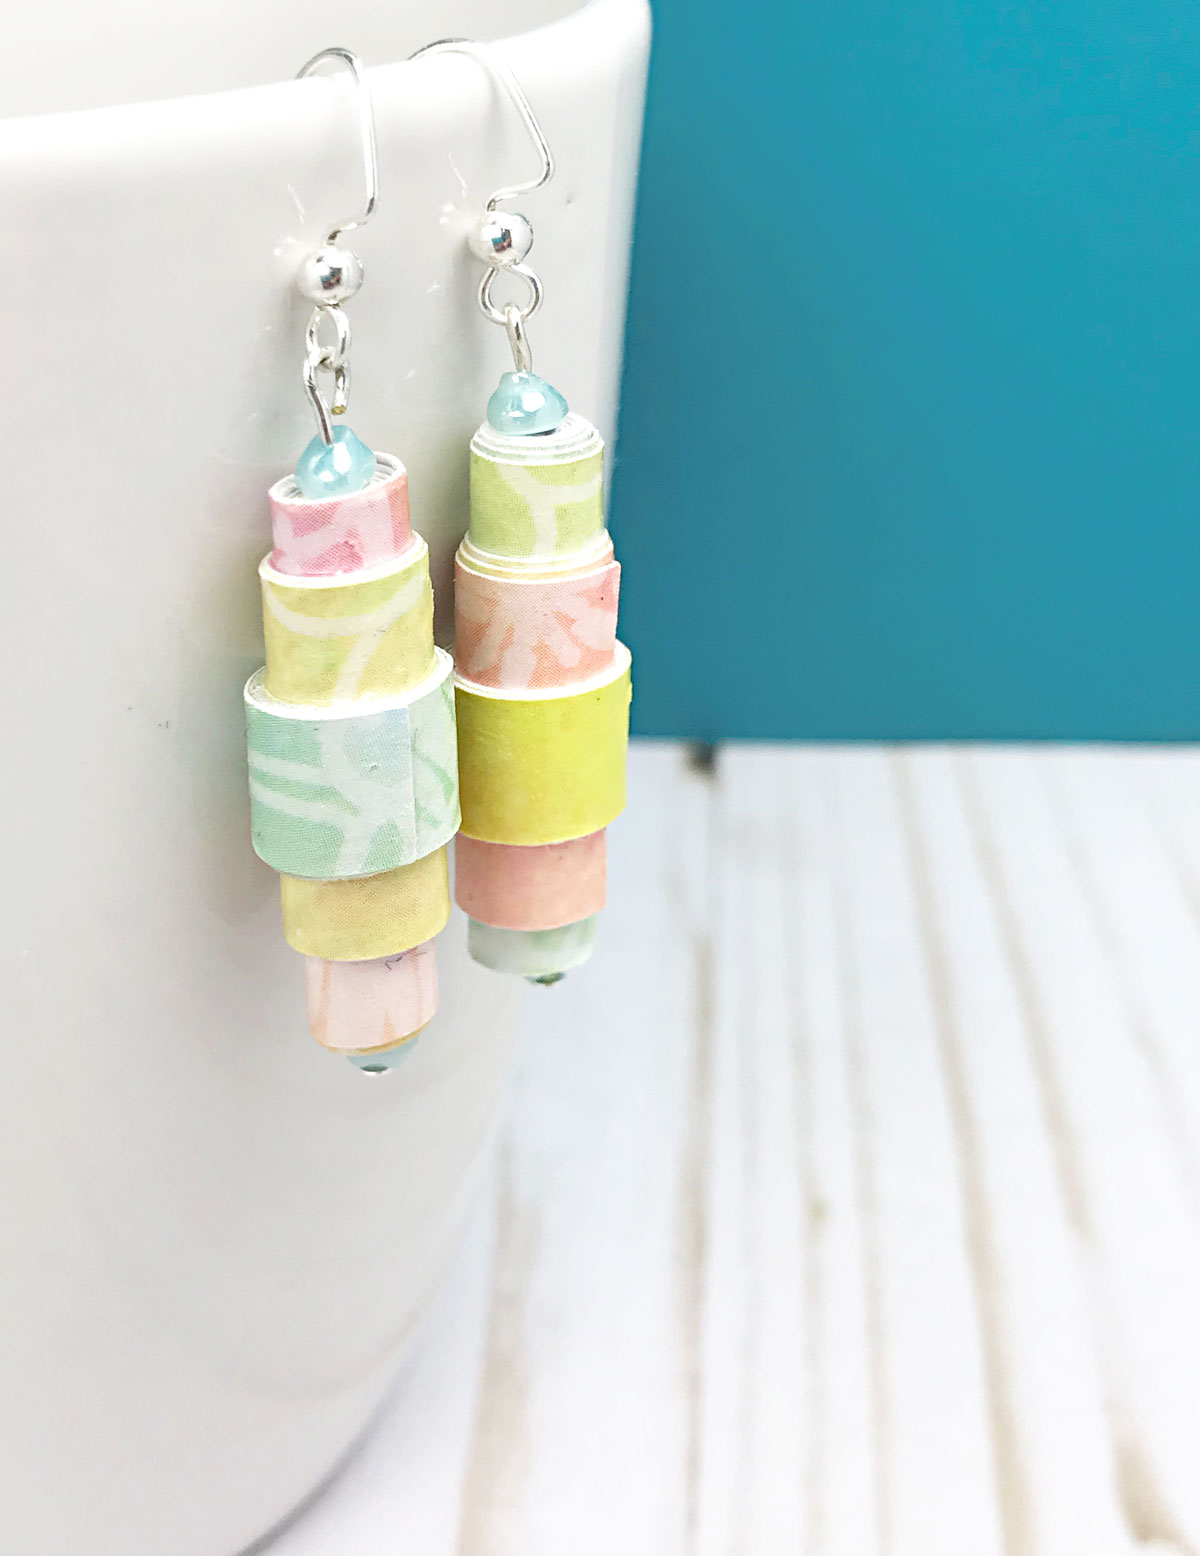 Rainbow paper bead earrings hanging from white cup.